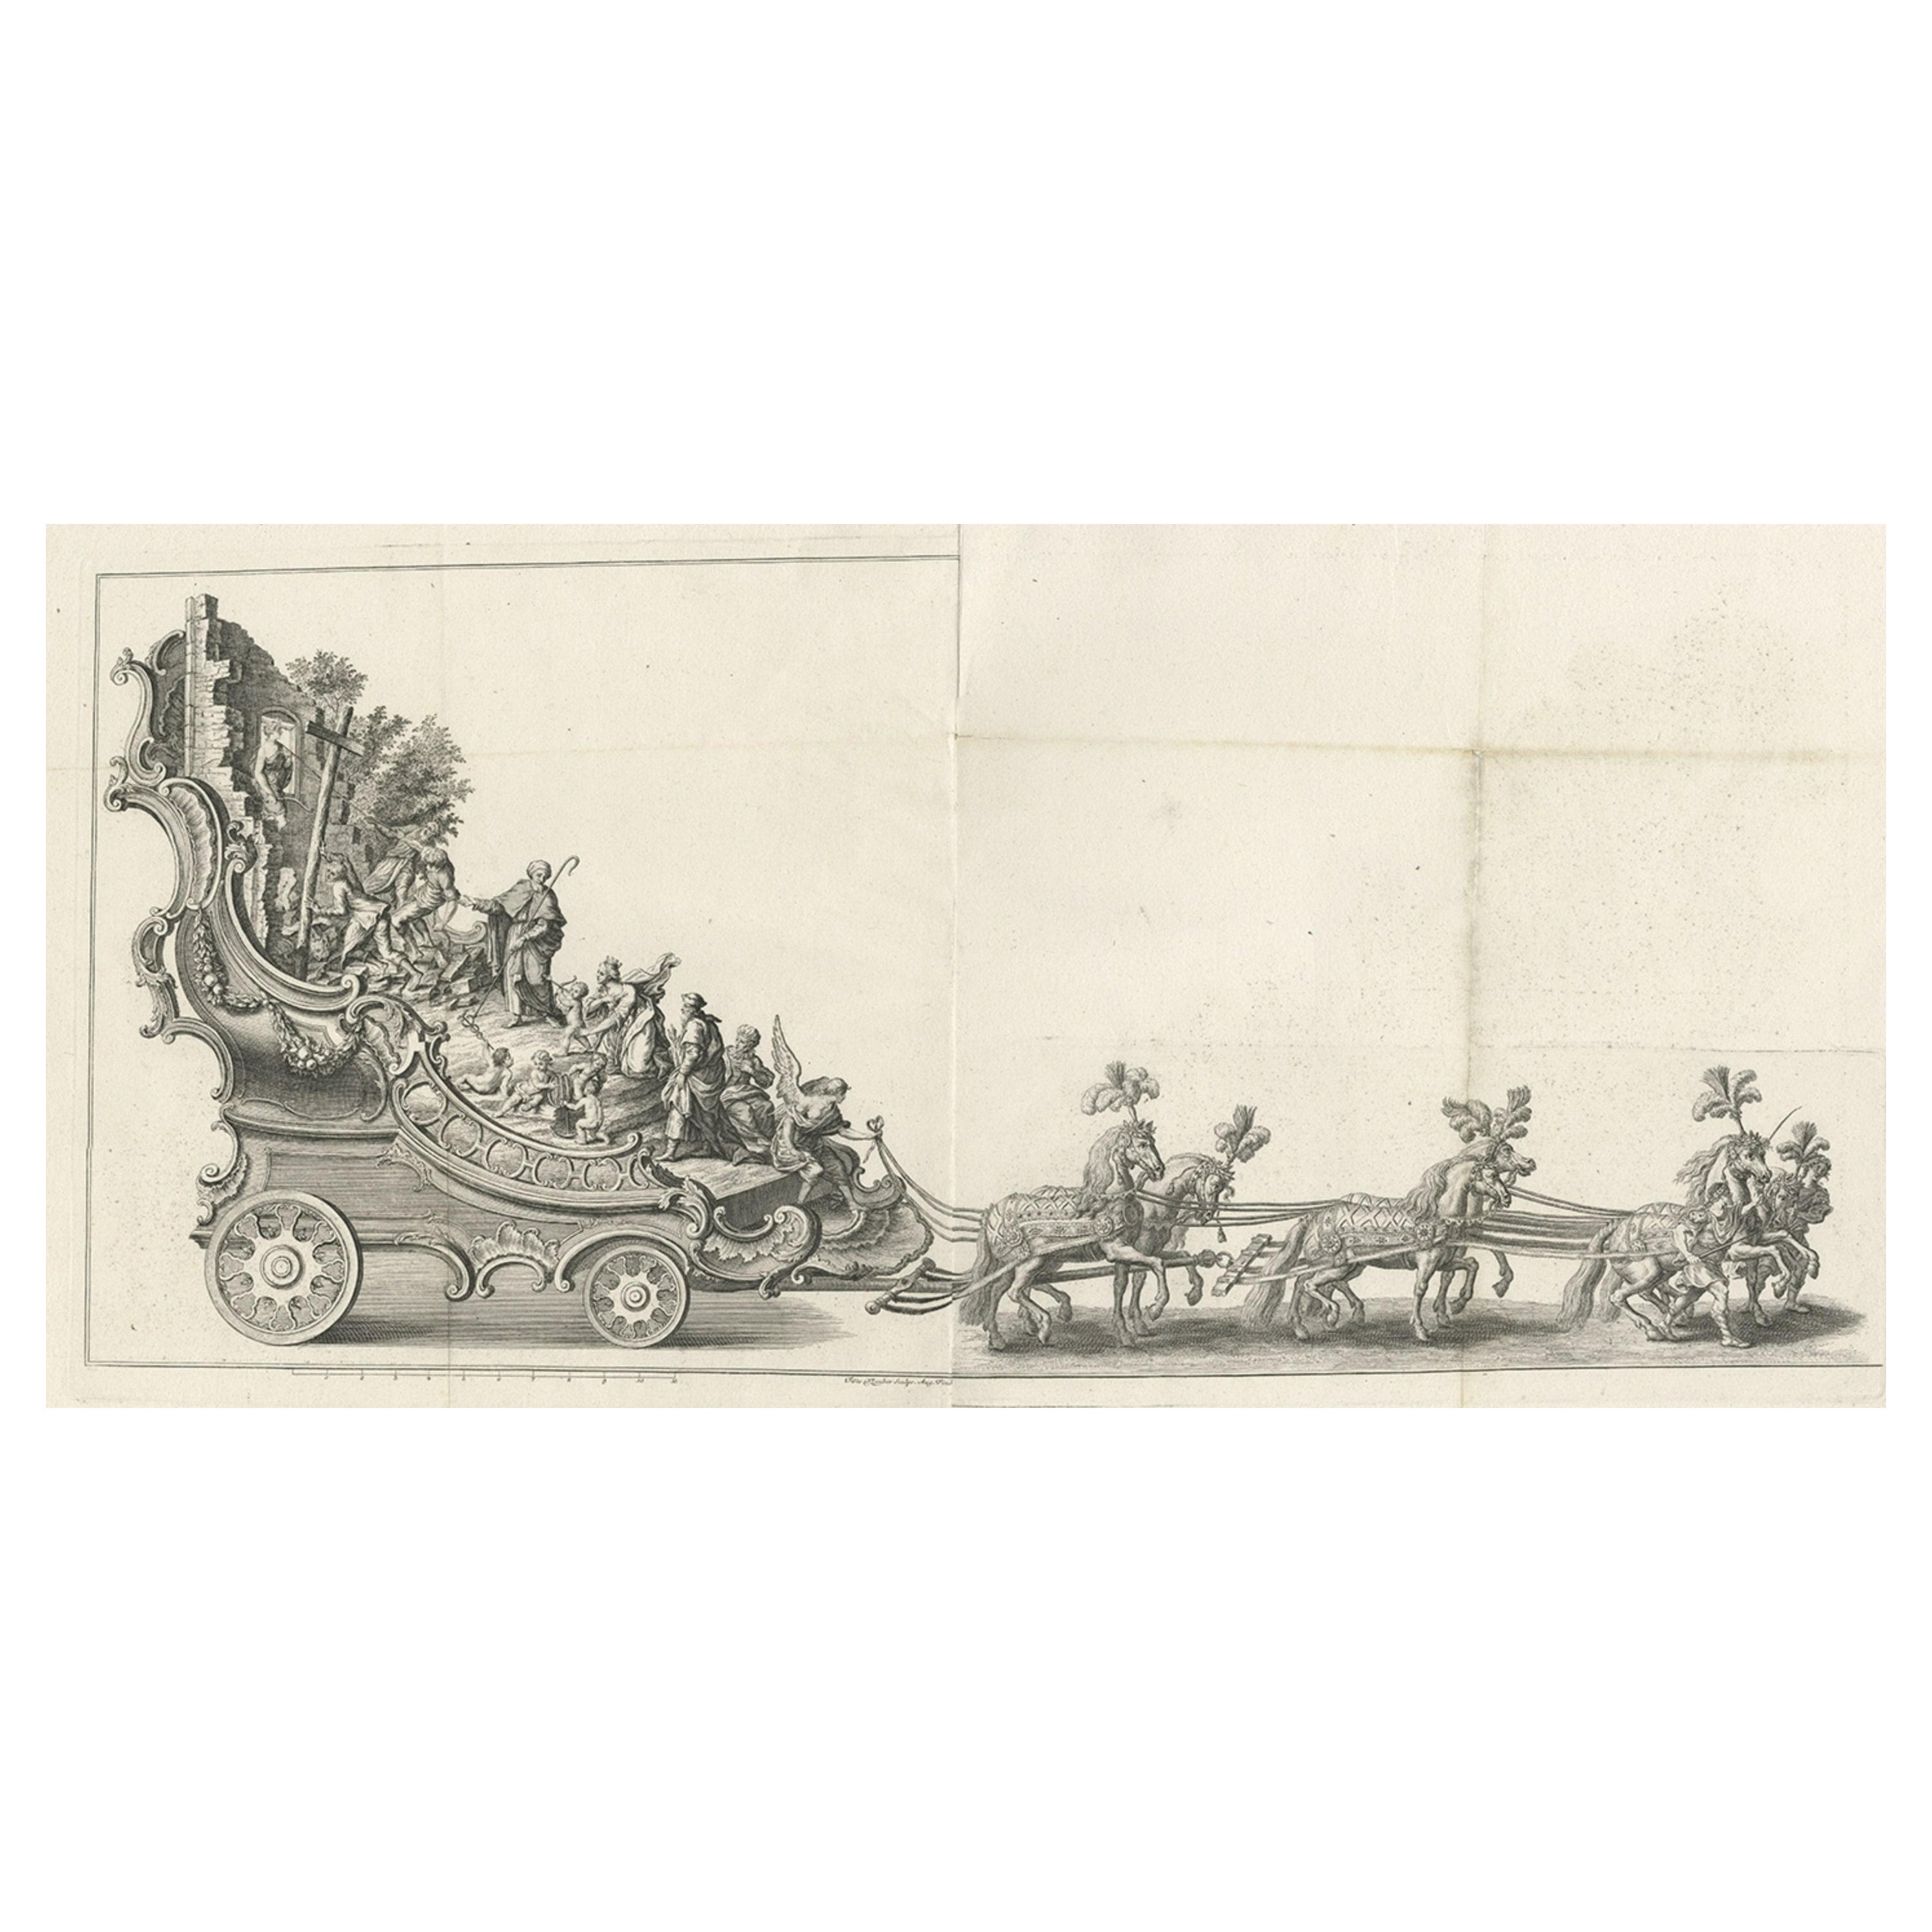 Remarkable Antique Print of a Horse Drawn Float with Religious Figures, 1775